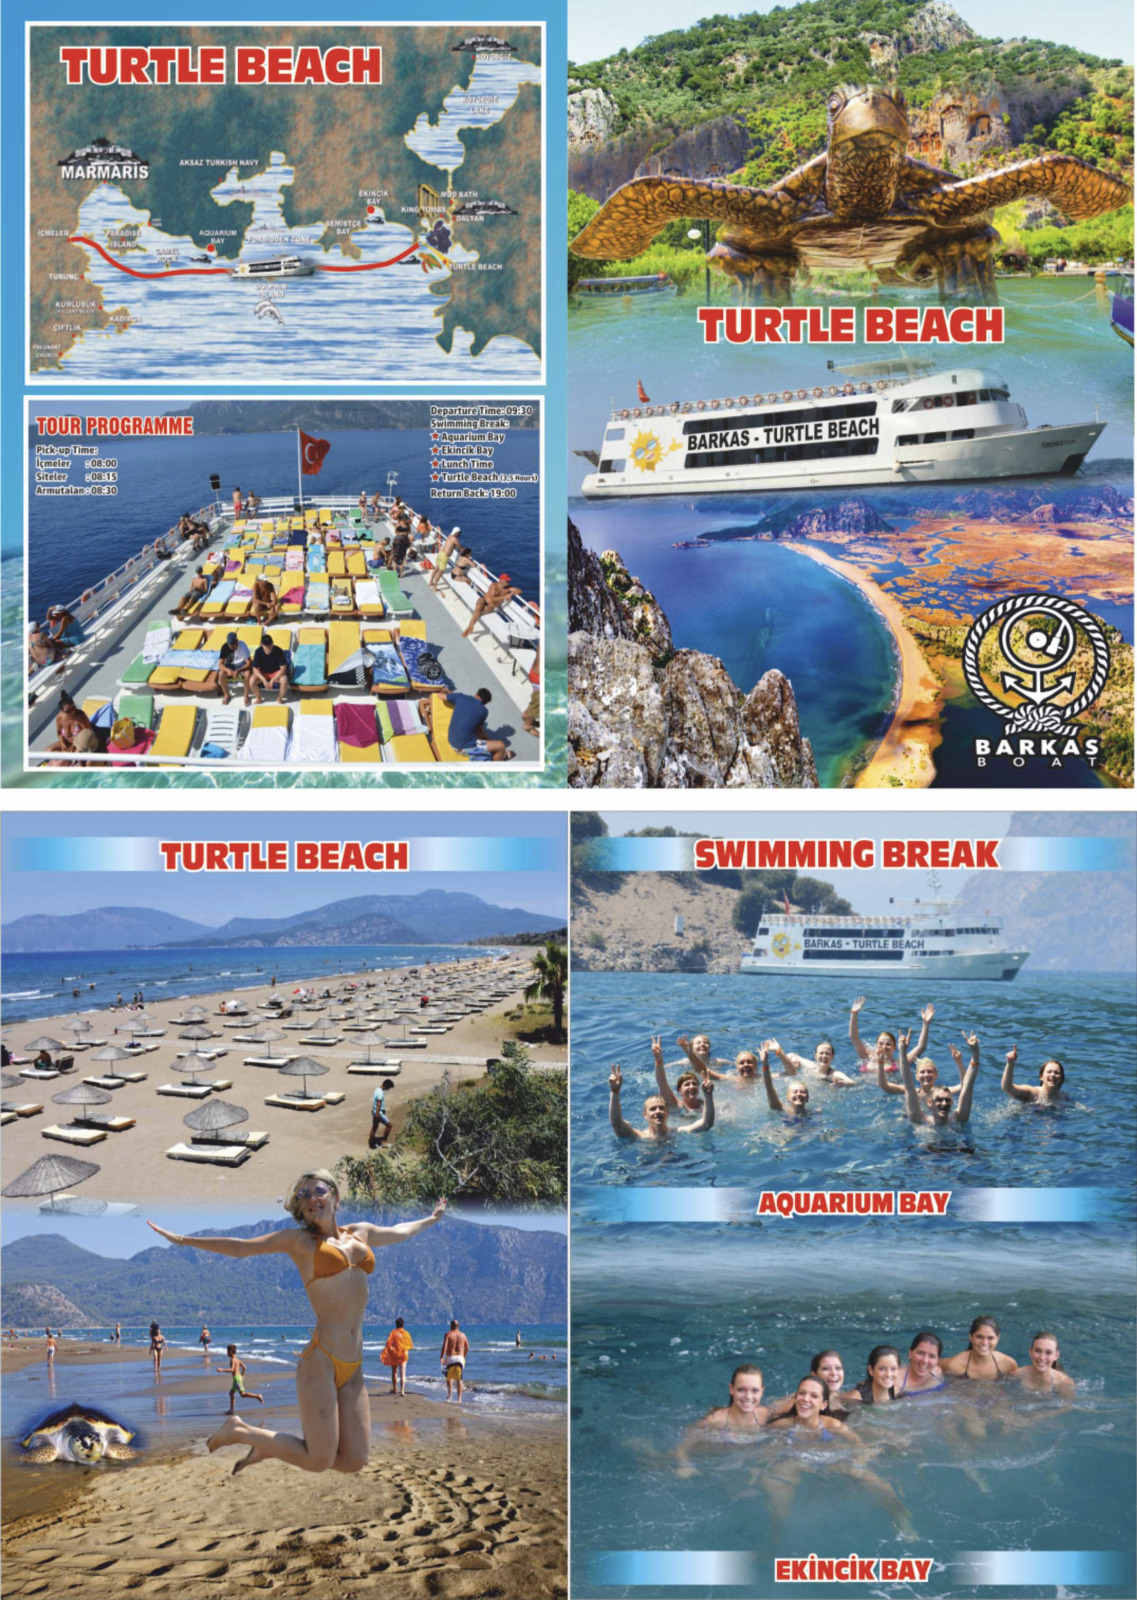 Barkas boat excursion leaflet (that is what the boat looks like